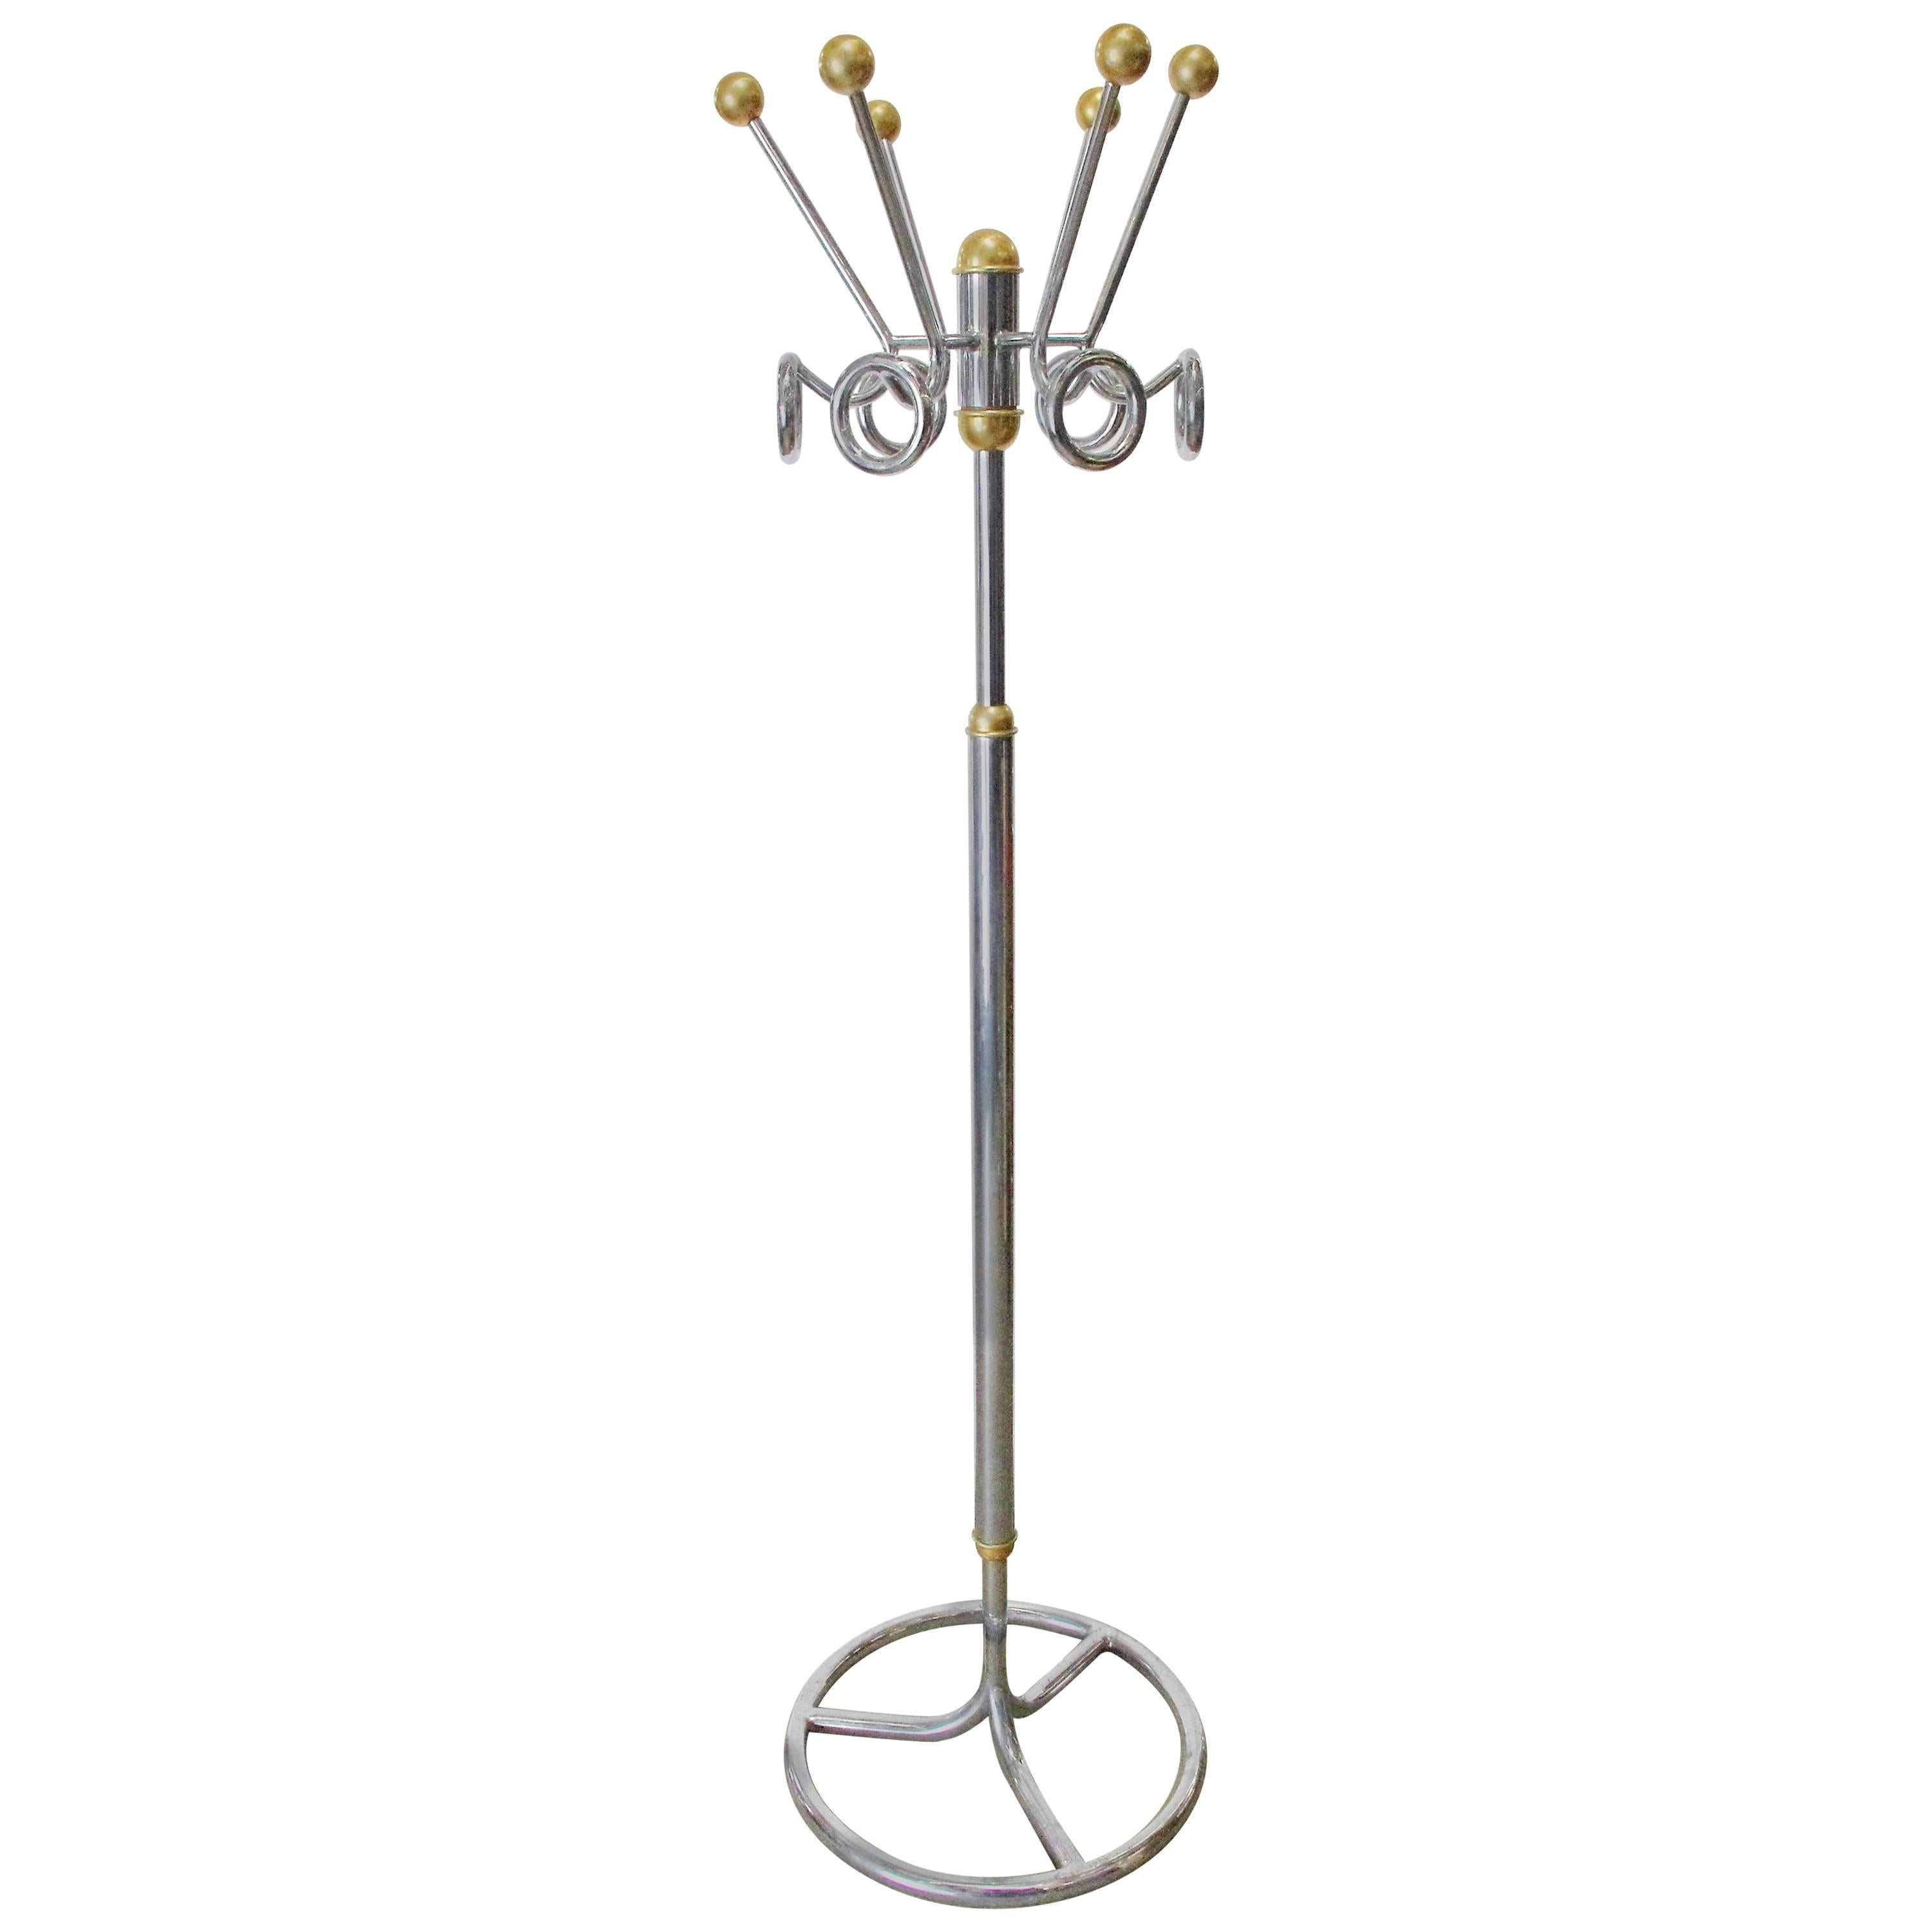 Vintage Italian Chrome and Brass Coat Hat Rack FINAL CLEARANCE SALE